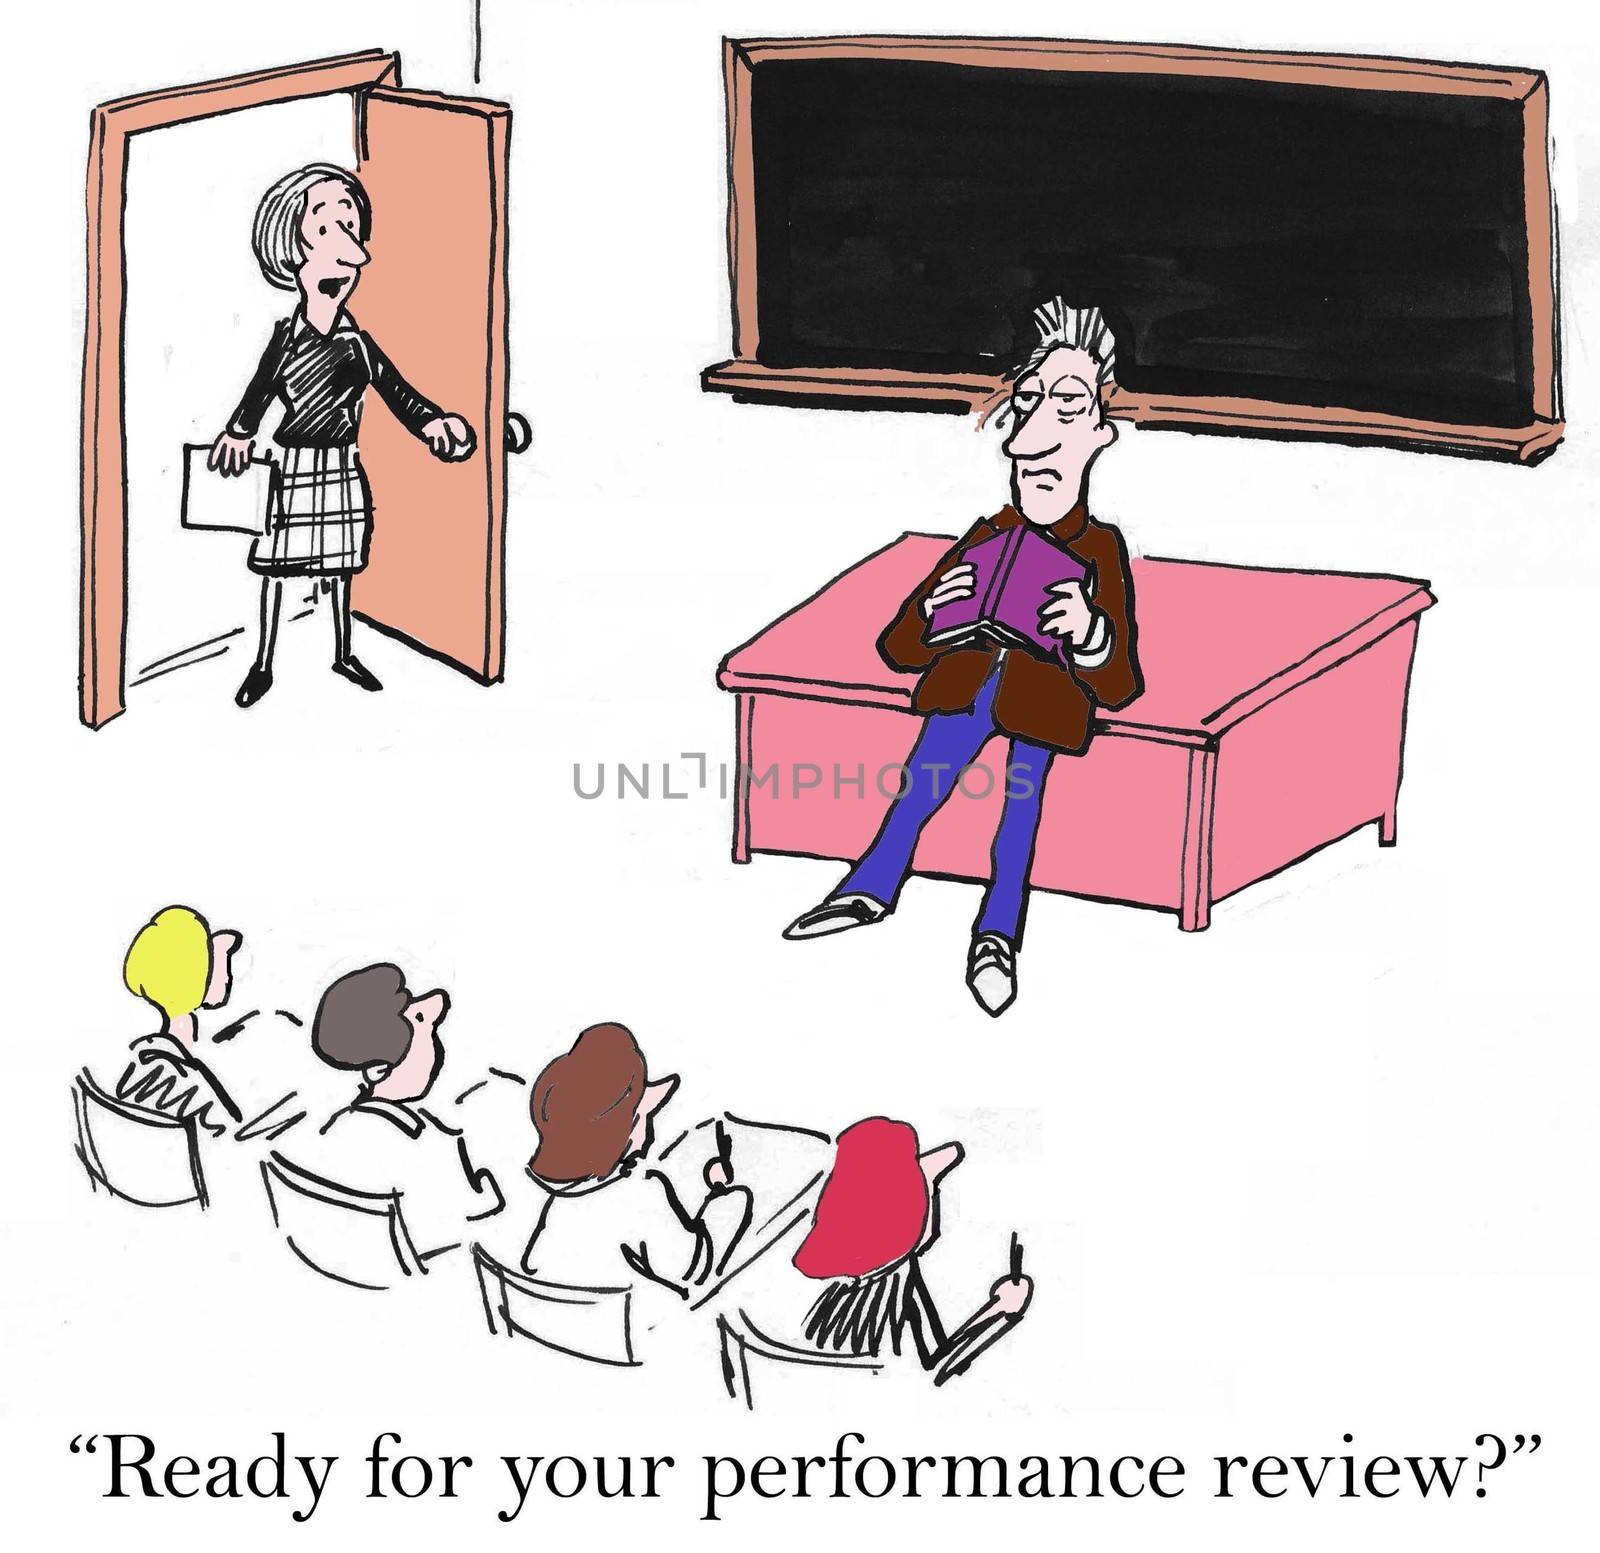 Performance Review by andrewgenn